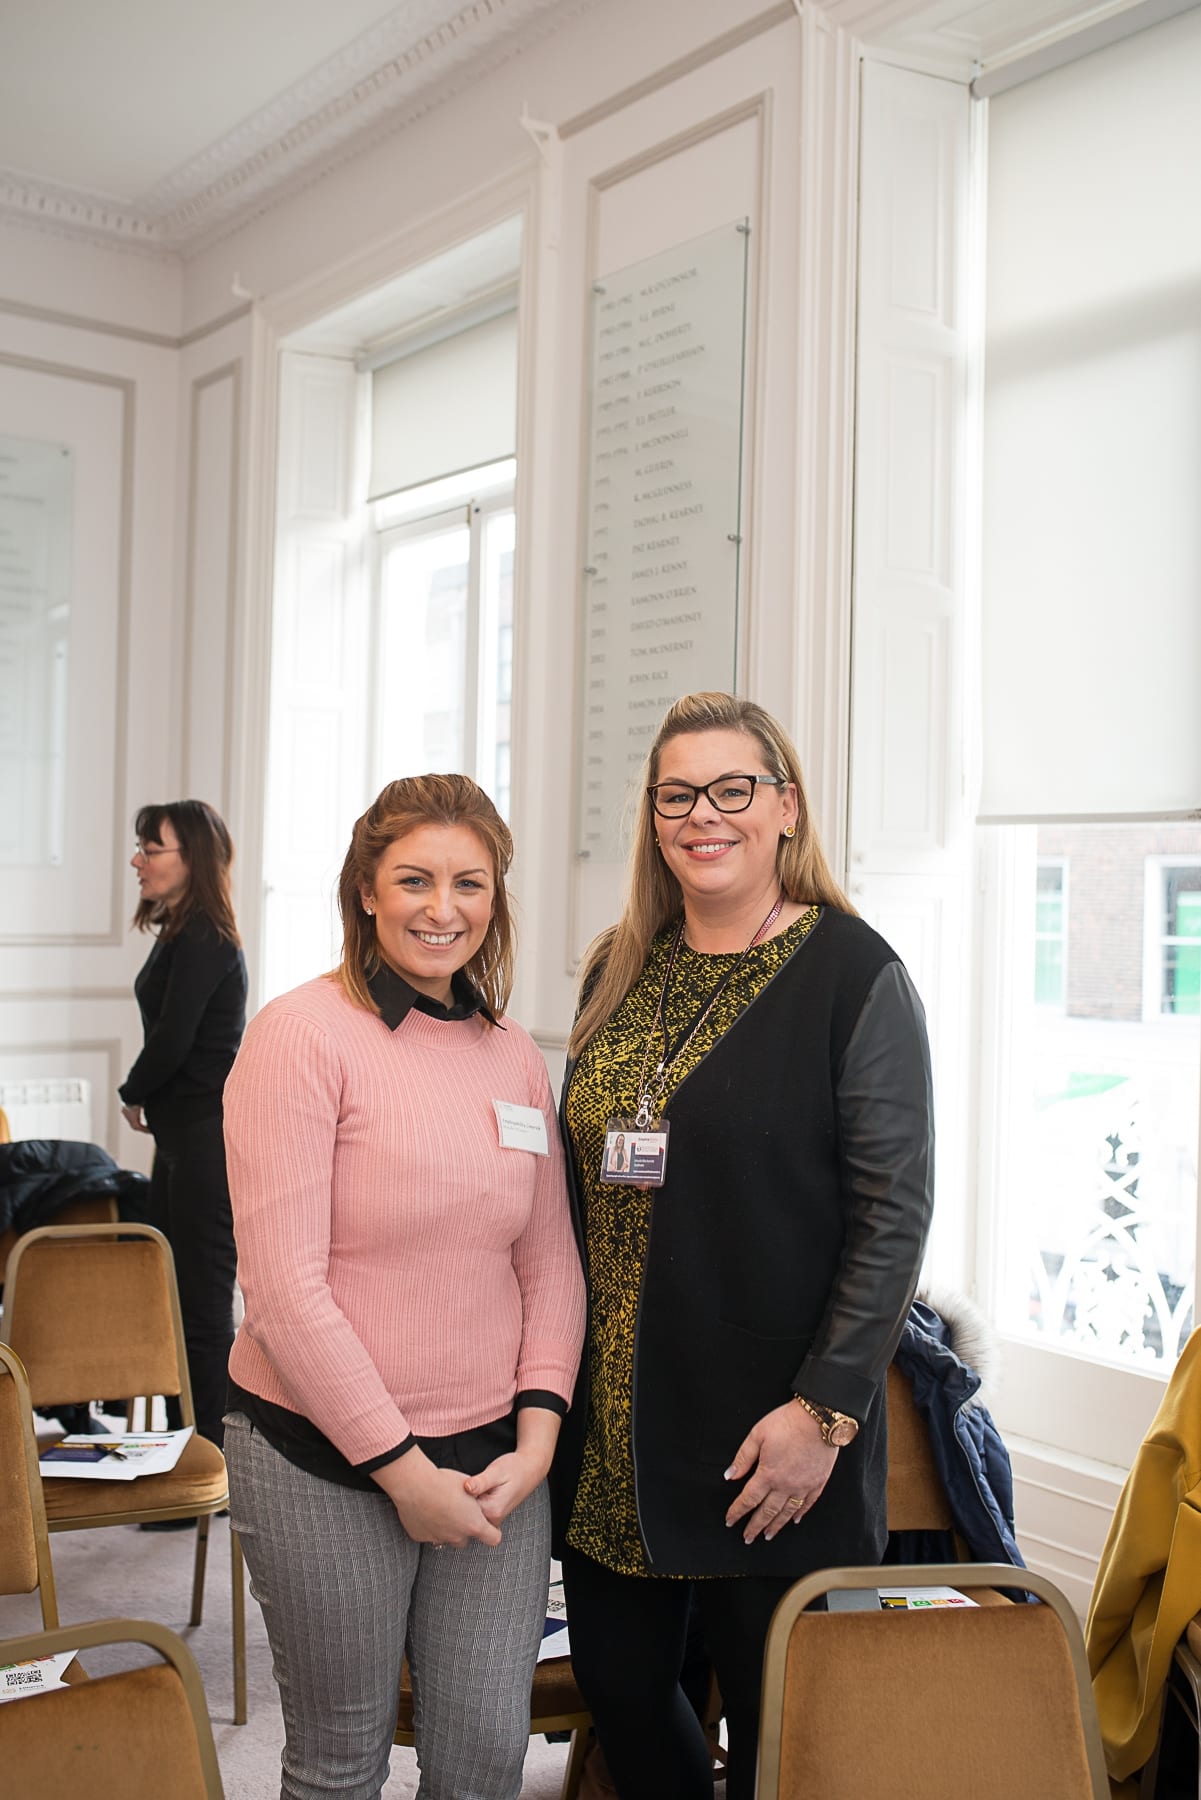 At the Limerick Chamber Skillnet Working Lunchtime Networking with Donal Fitzgibbon was From left to right: Michelle O’Connor and Ursula MacKenzie both from Employability Limerick 
Image by Morning Star Photography